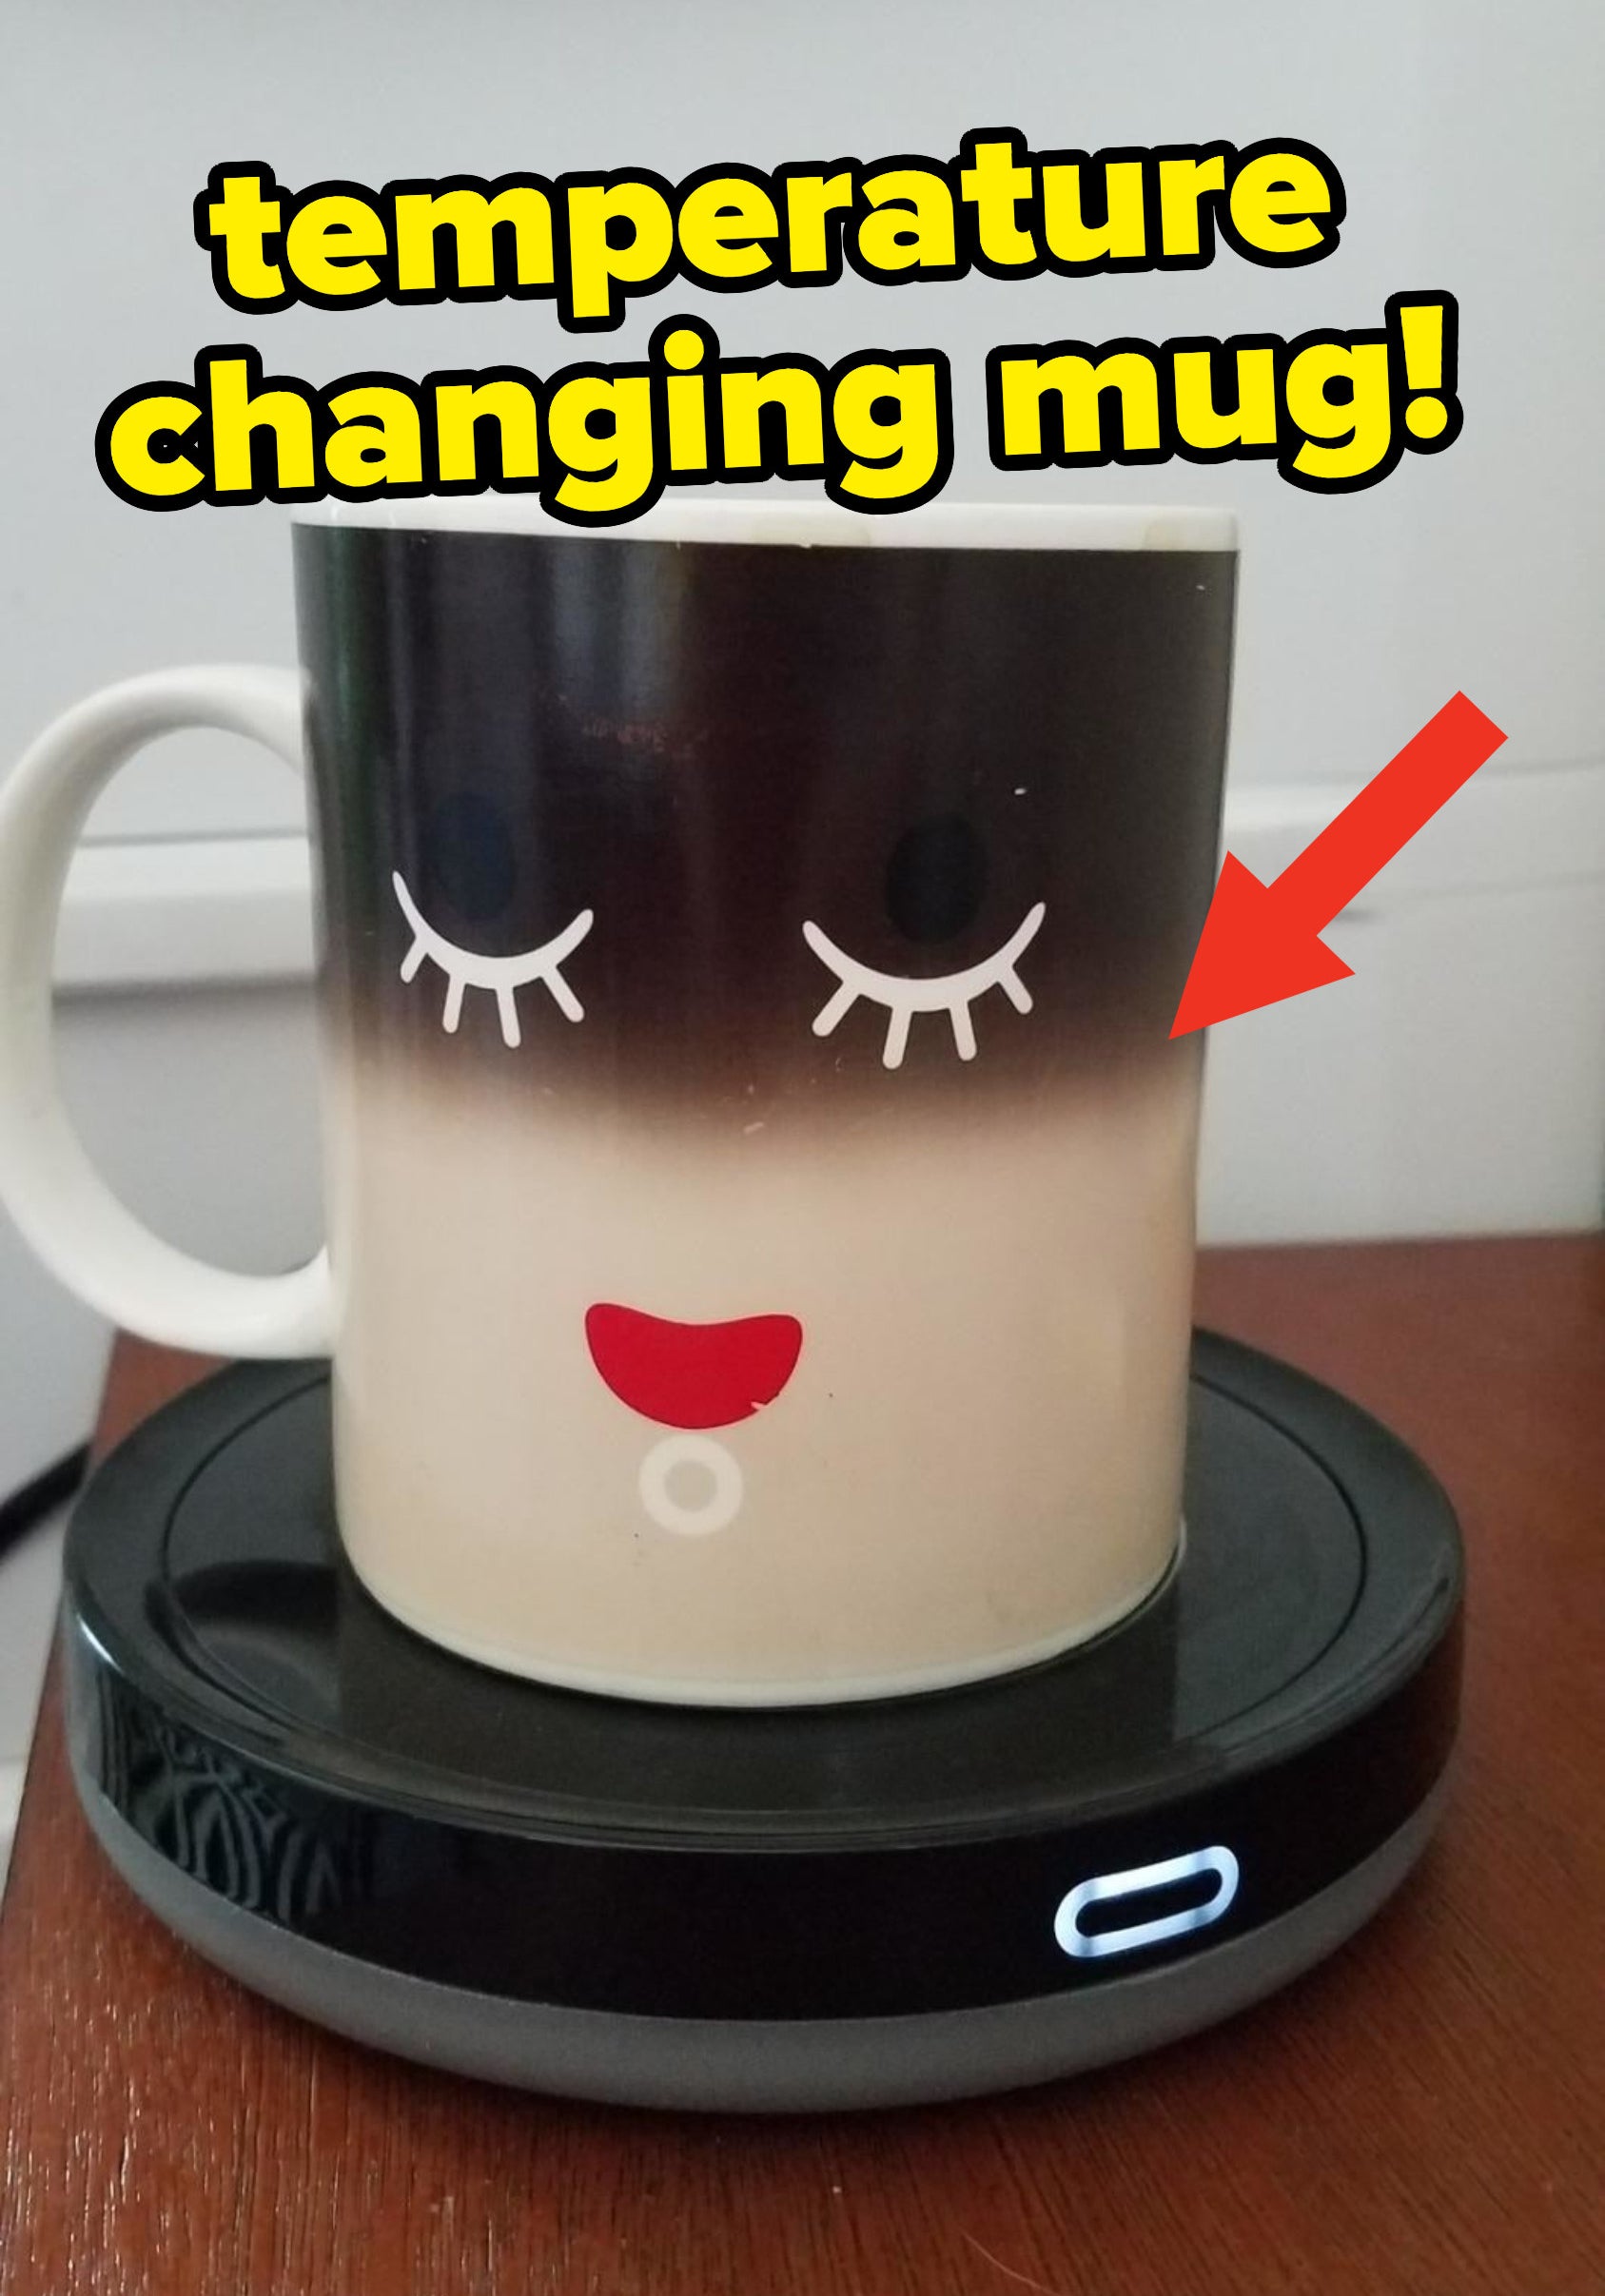 A temperature changing mug on top of a mug warmer, showing that the coffee inside is warm based on the color change